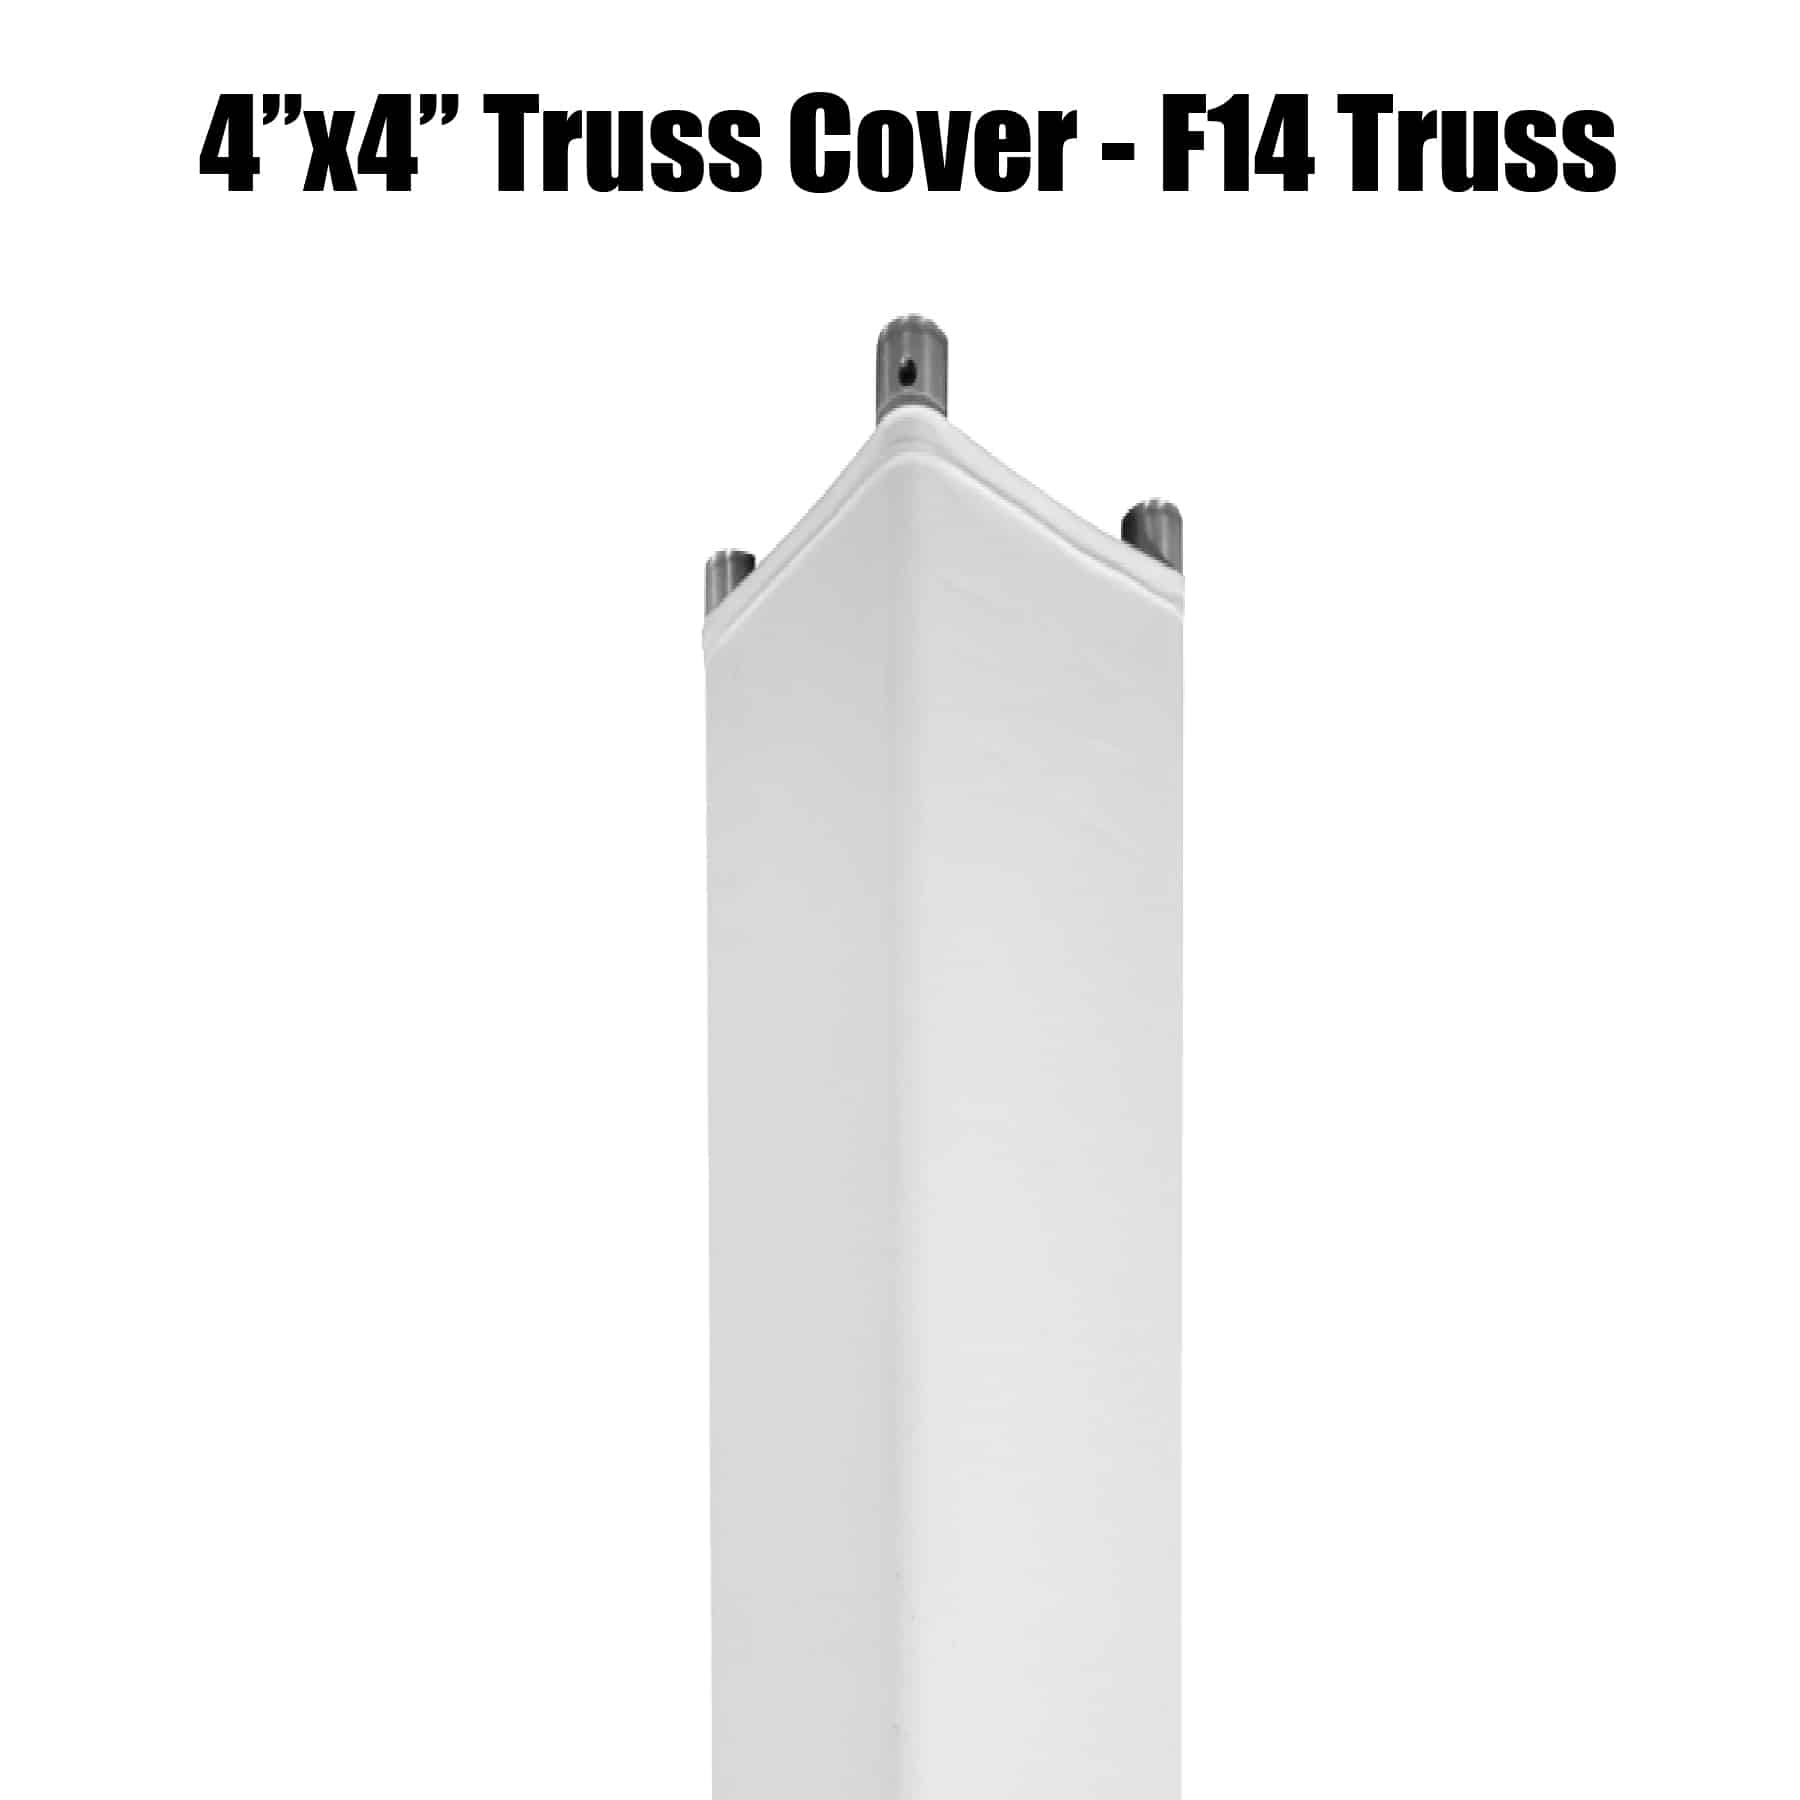 F14 Truss Cover - Hook and Loop 4"x4" - StretchyScreens